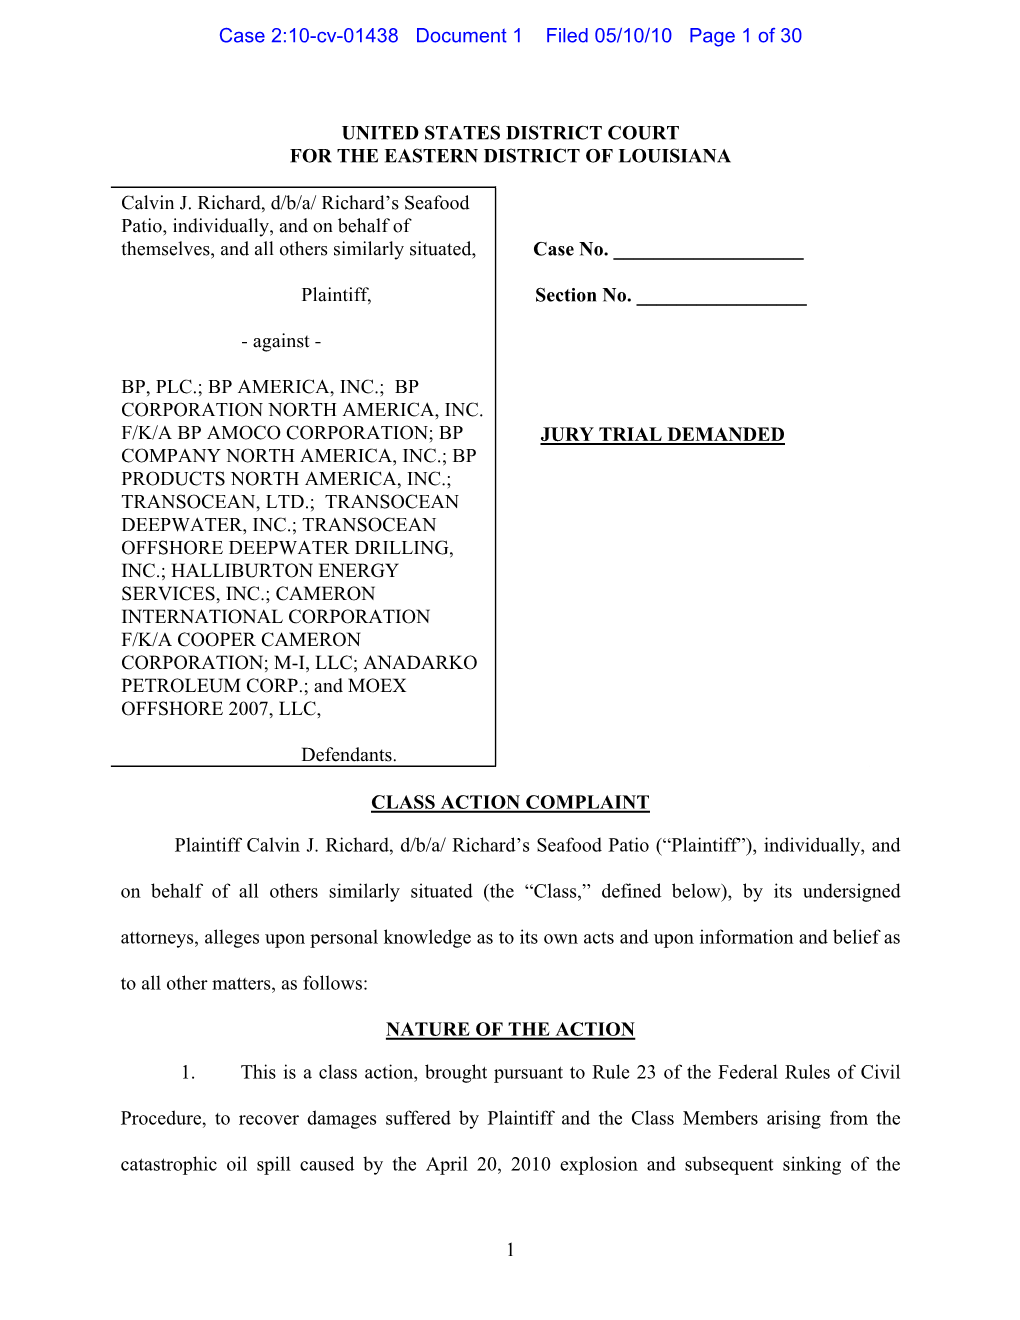 Case 2:10-Cv-01438 Document 1 Filed 05/10/10 Page 1 of 30